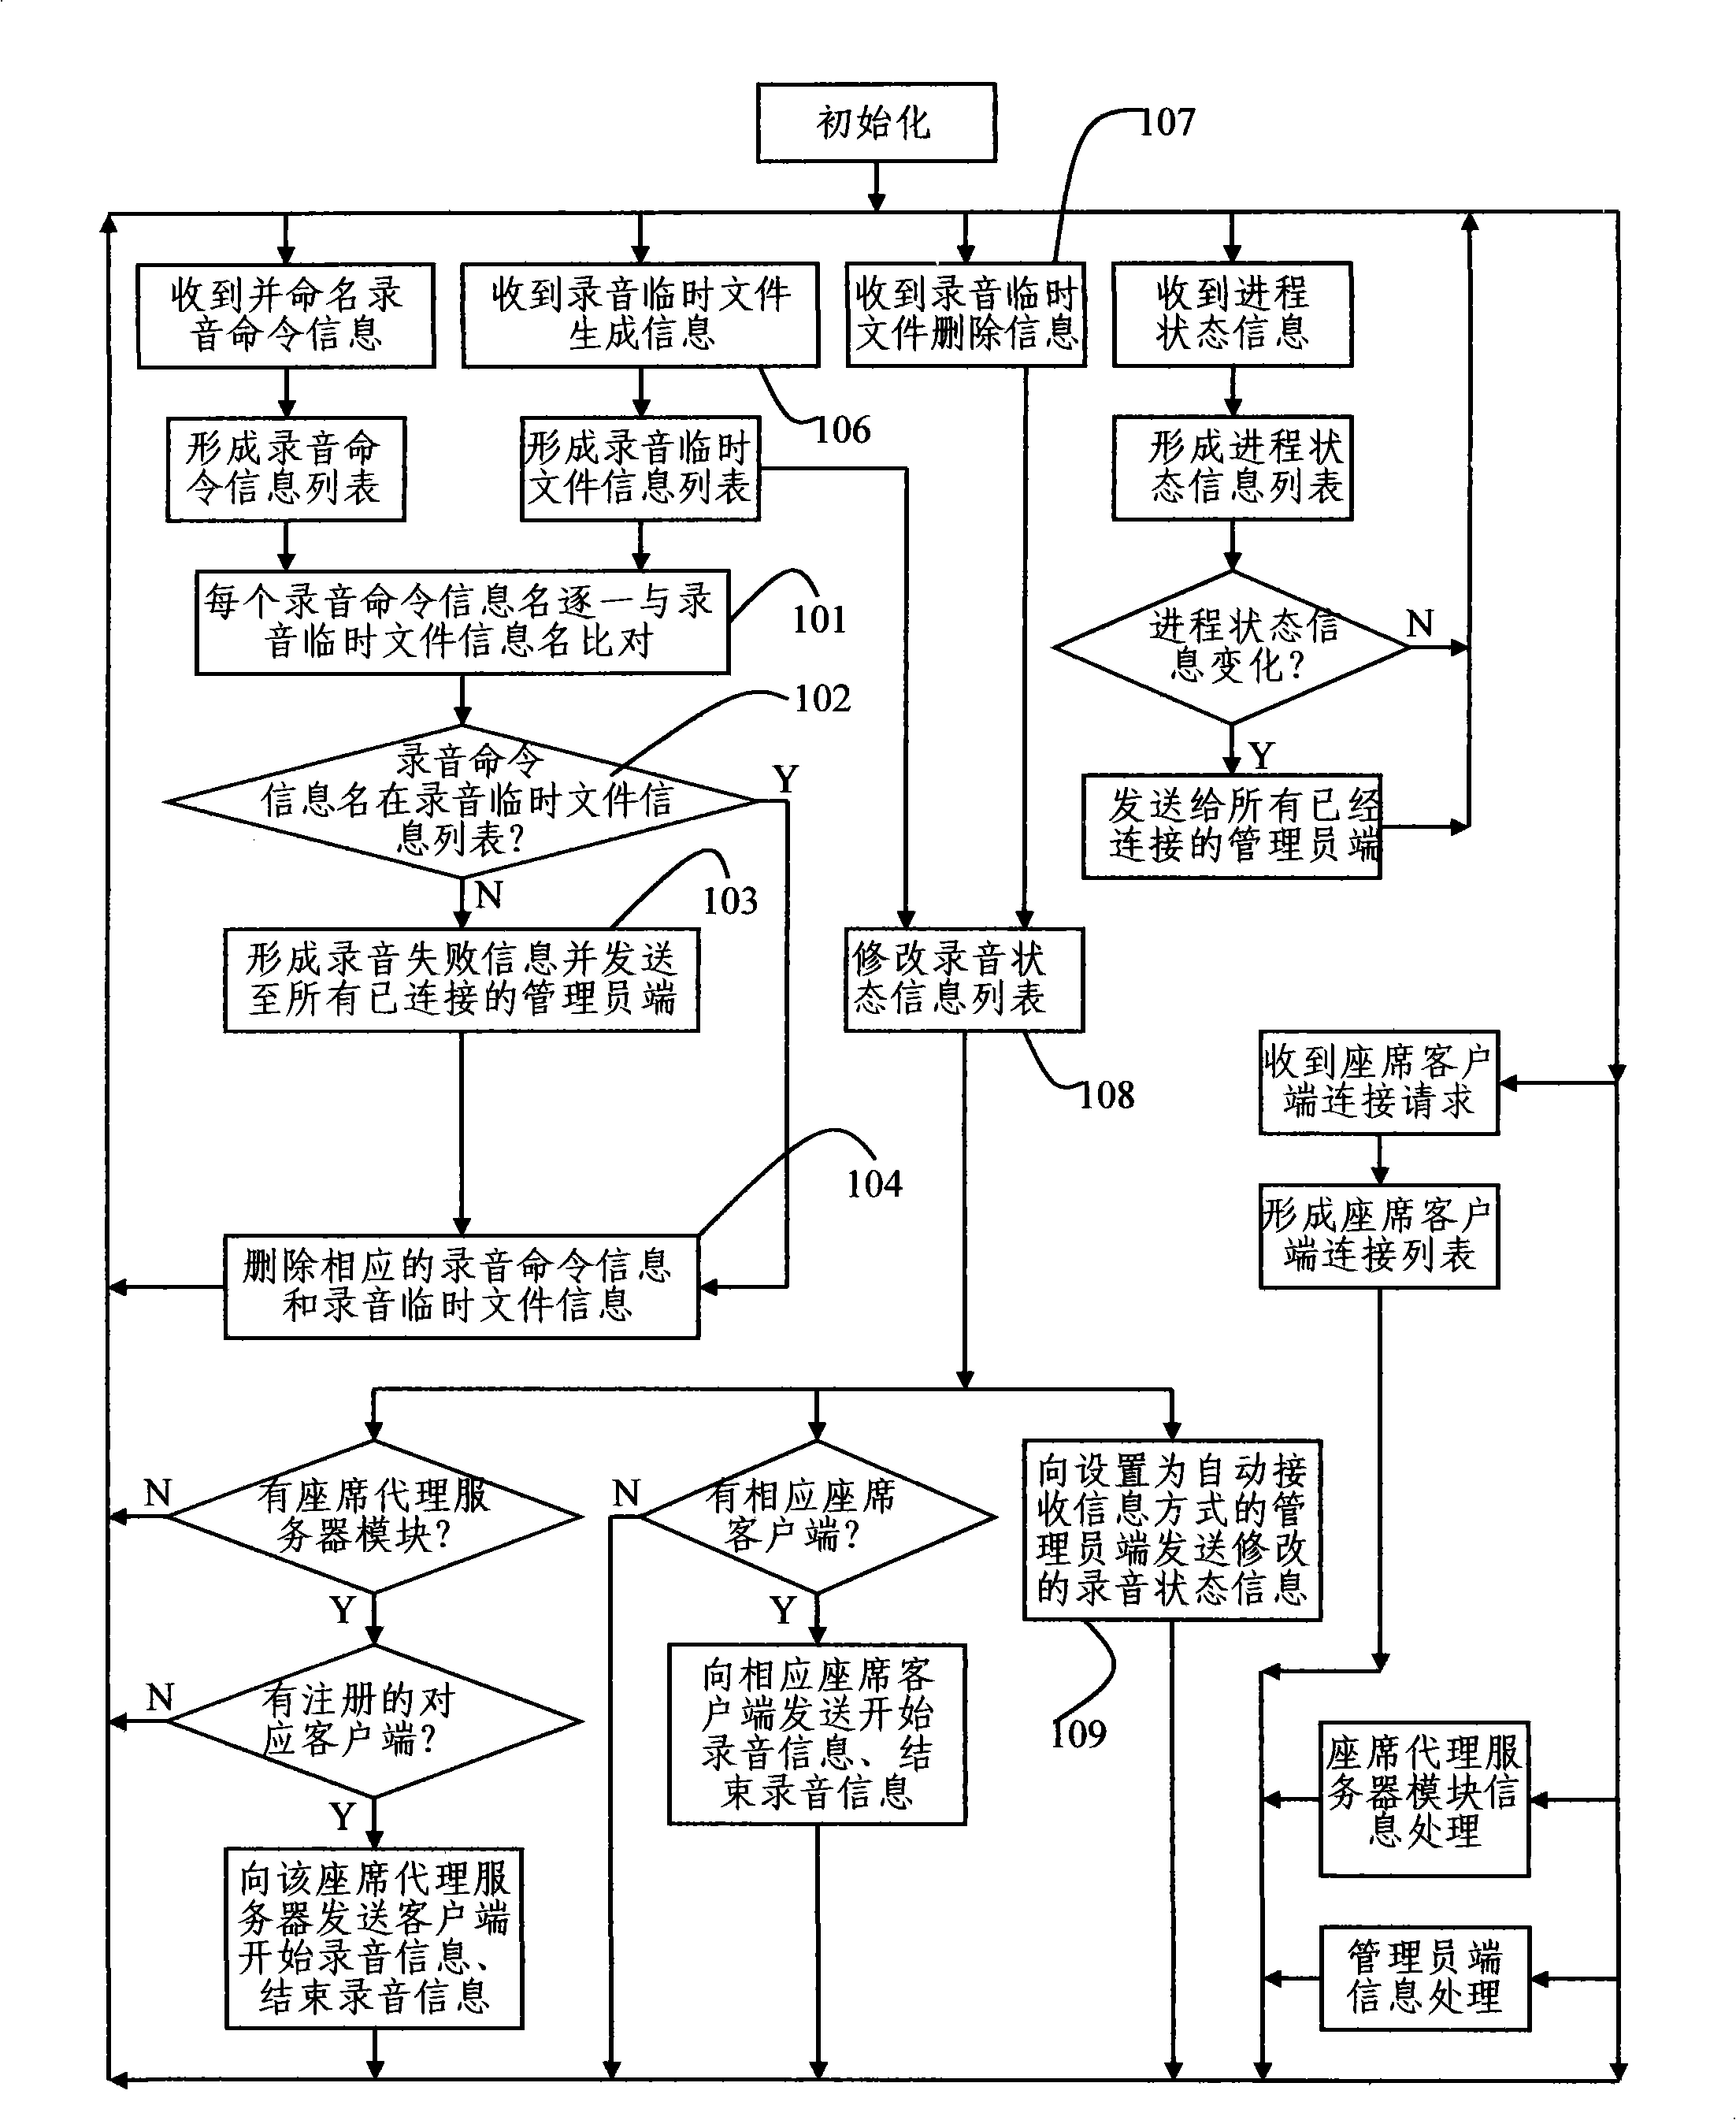 Real-time recording supervising service method based on network voice communication